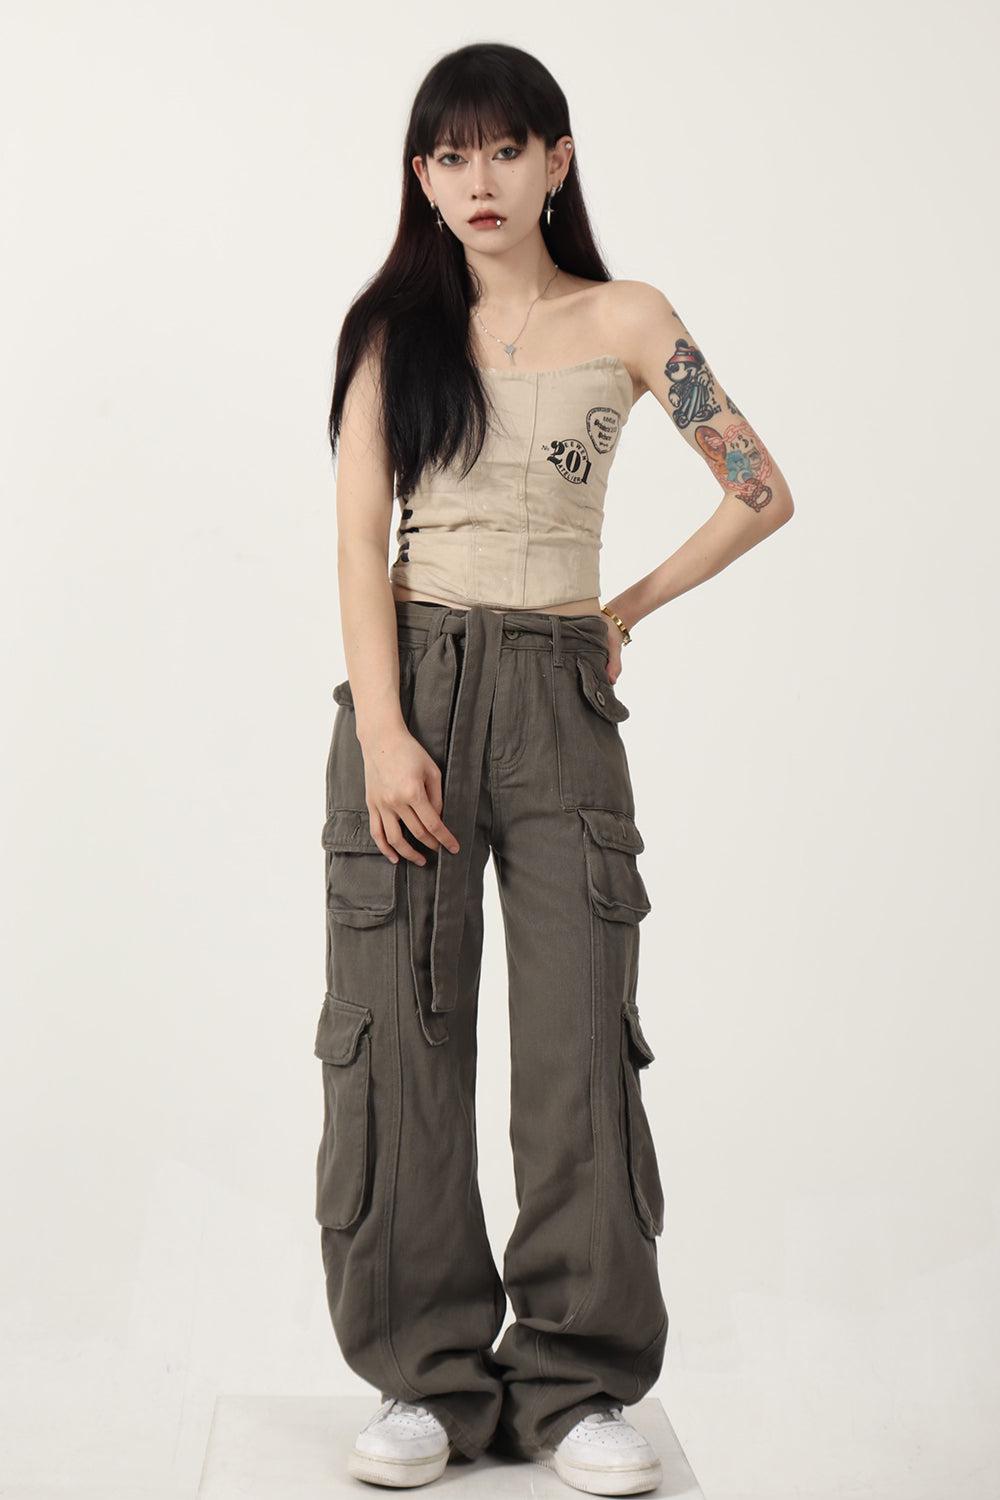 Yuppie Style Cargo Pants Korean Street Fashion Pants By Jump Next Shop Online at OH Vault